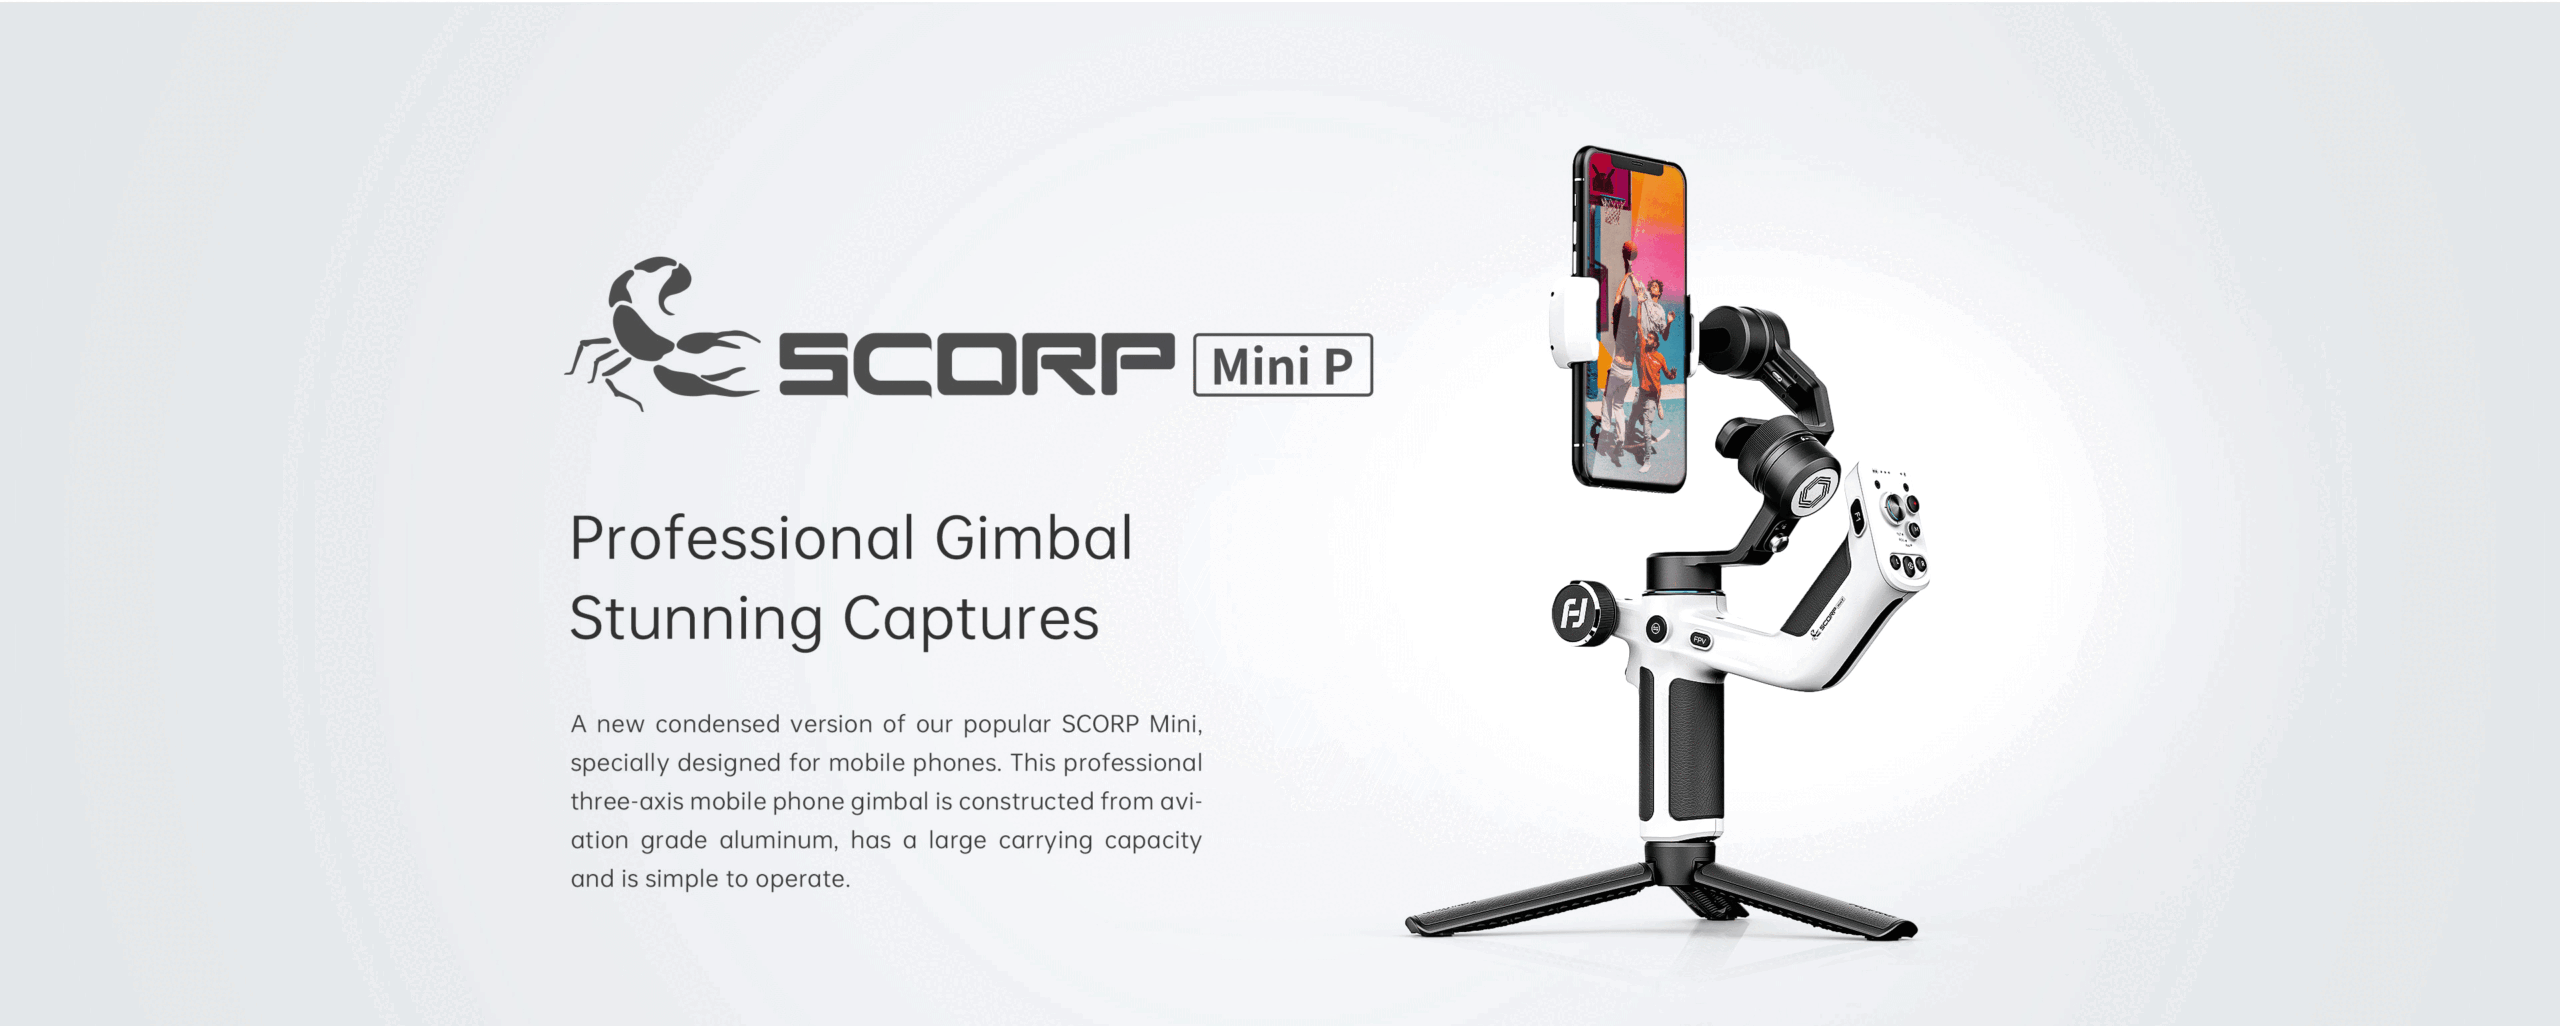 FeiyuTech Official SCORP MINI-P 3-Axis Handheld Gimbal Handle Grip for Smartphone iPhone Samsung Xiaomi with Tripod 520g load